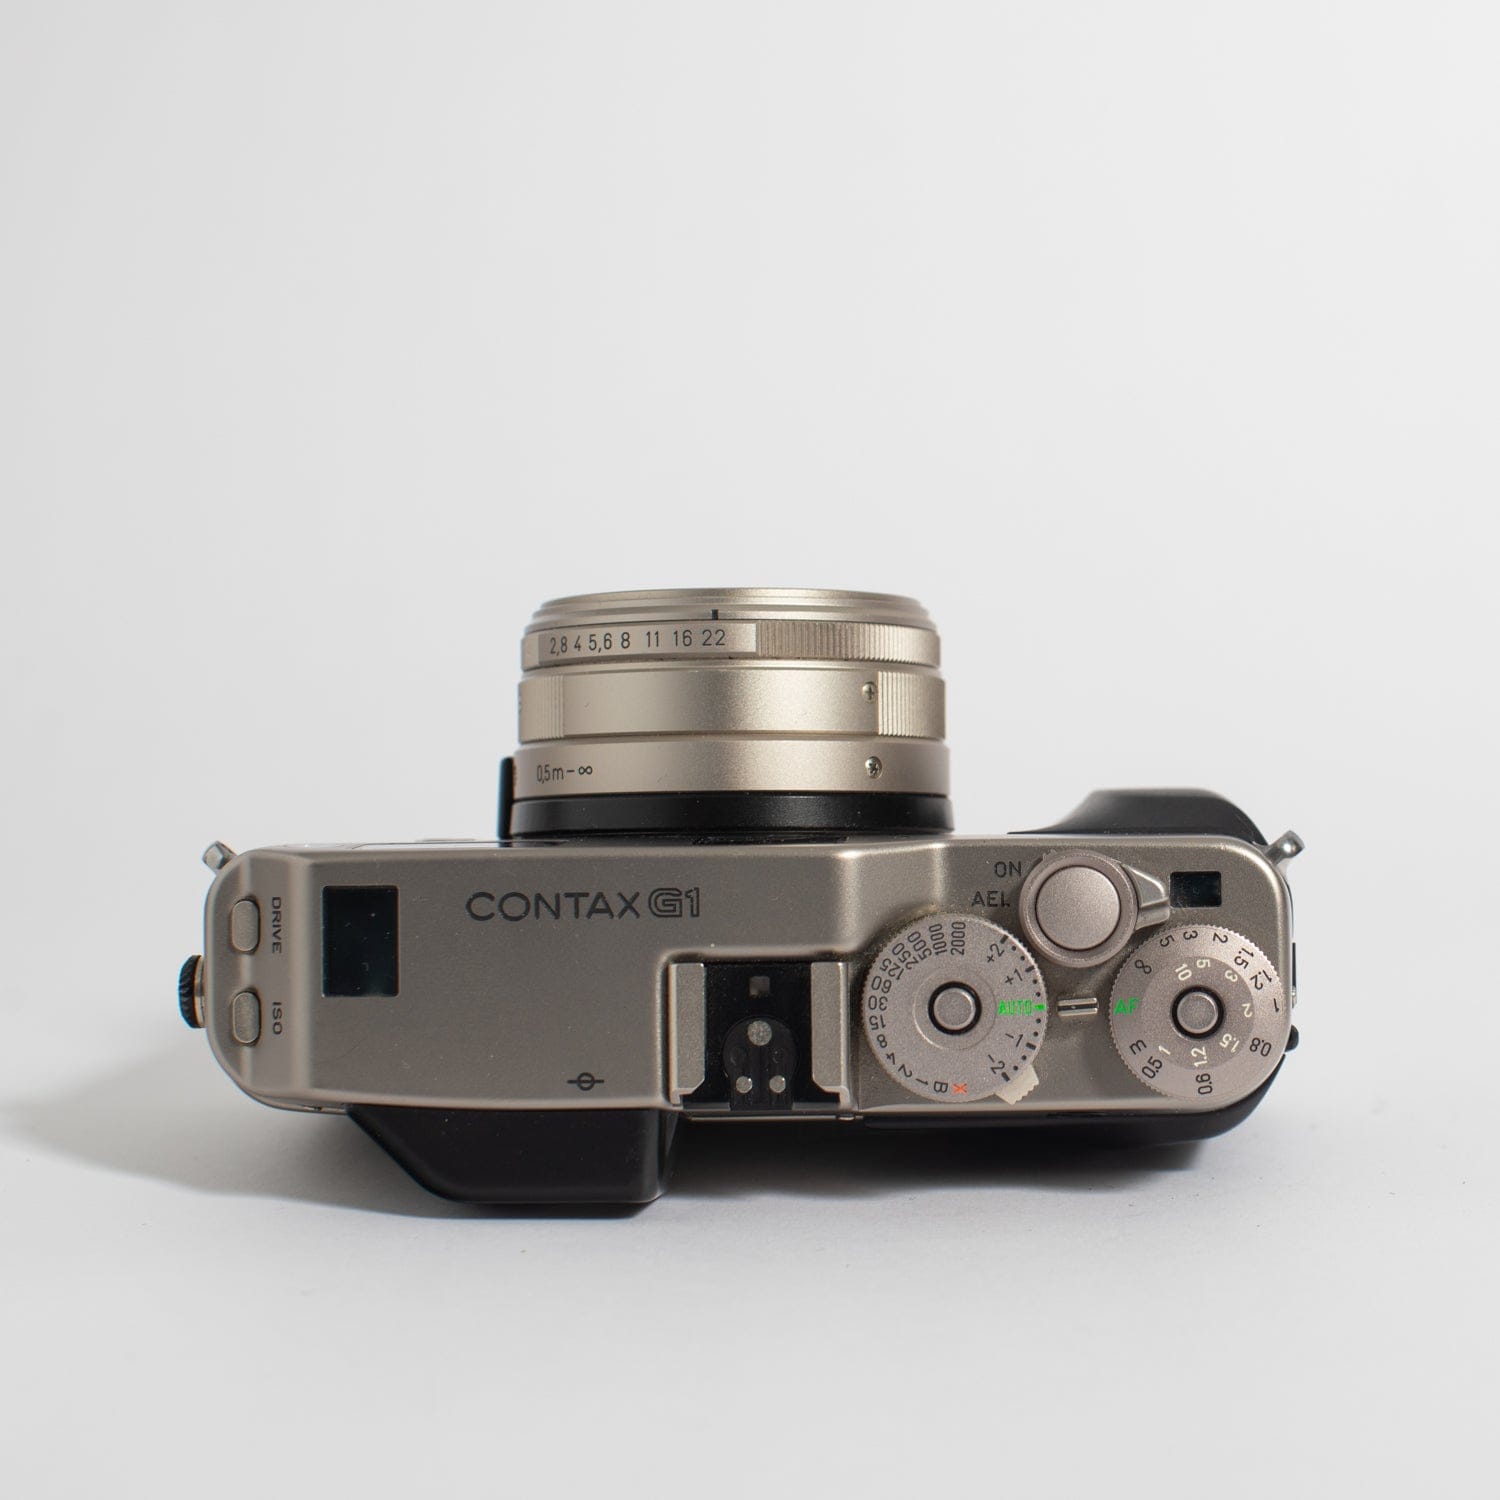 Contax G1 Green Label with Carl Zeiss 28mm f/2.8 Lens – Film